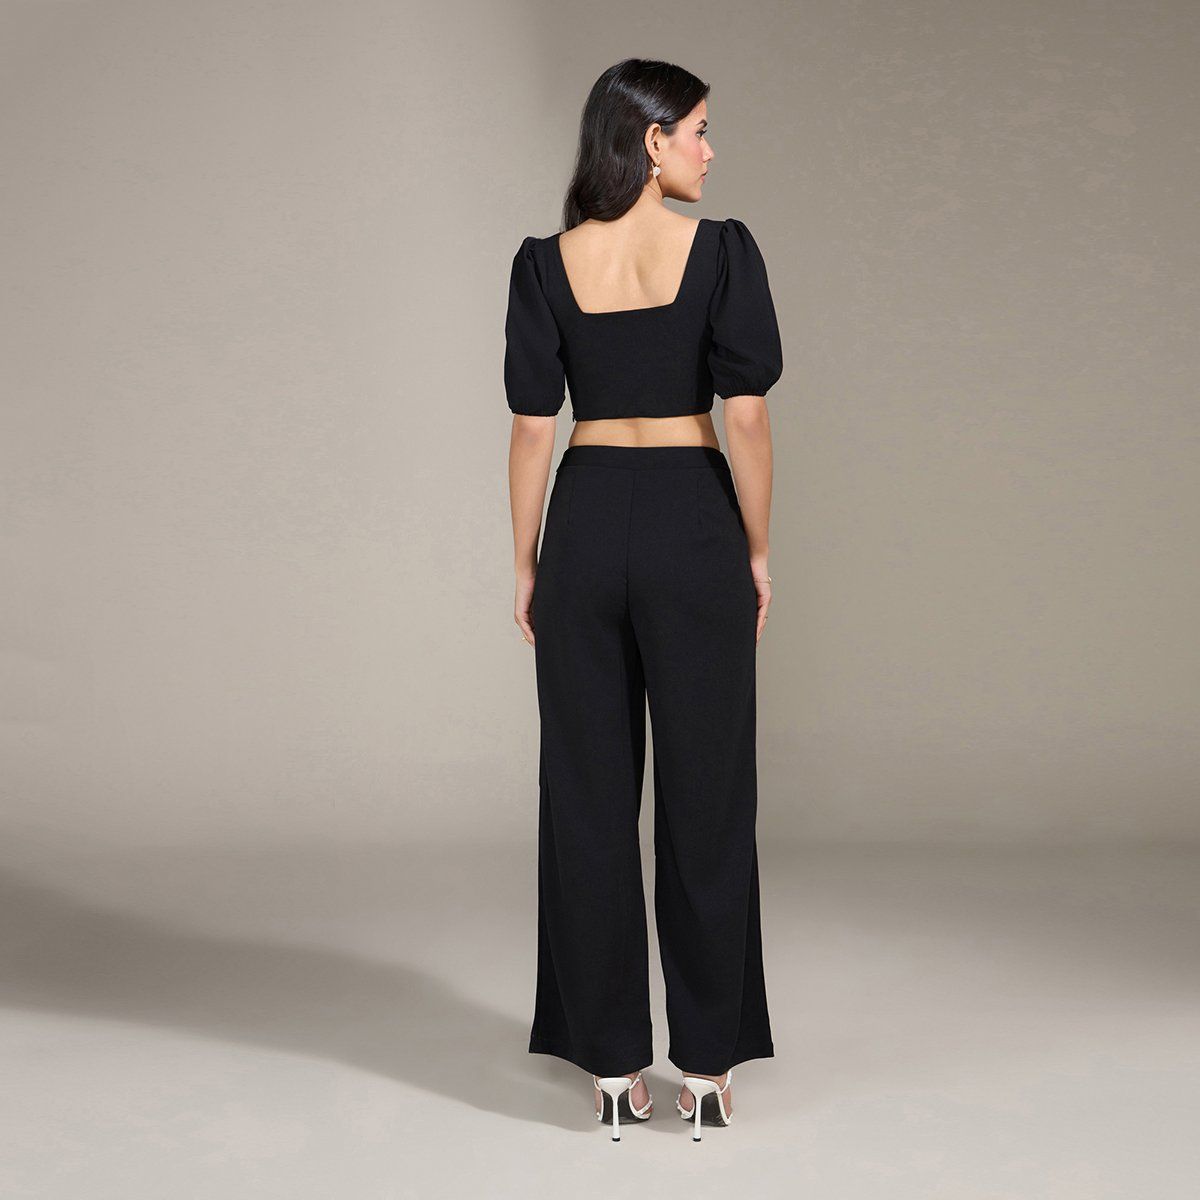 Get Cotton Flax Wide Leg Pants with Crop Top Set at ₹ 1599 | LBB Shop